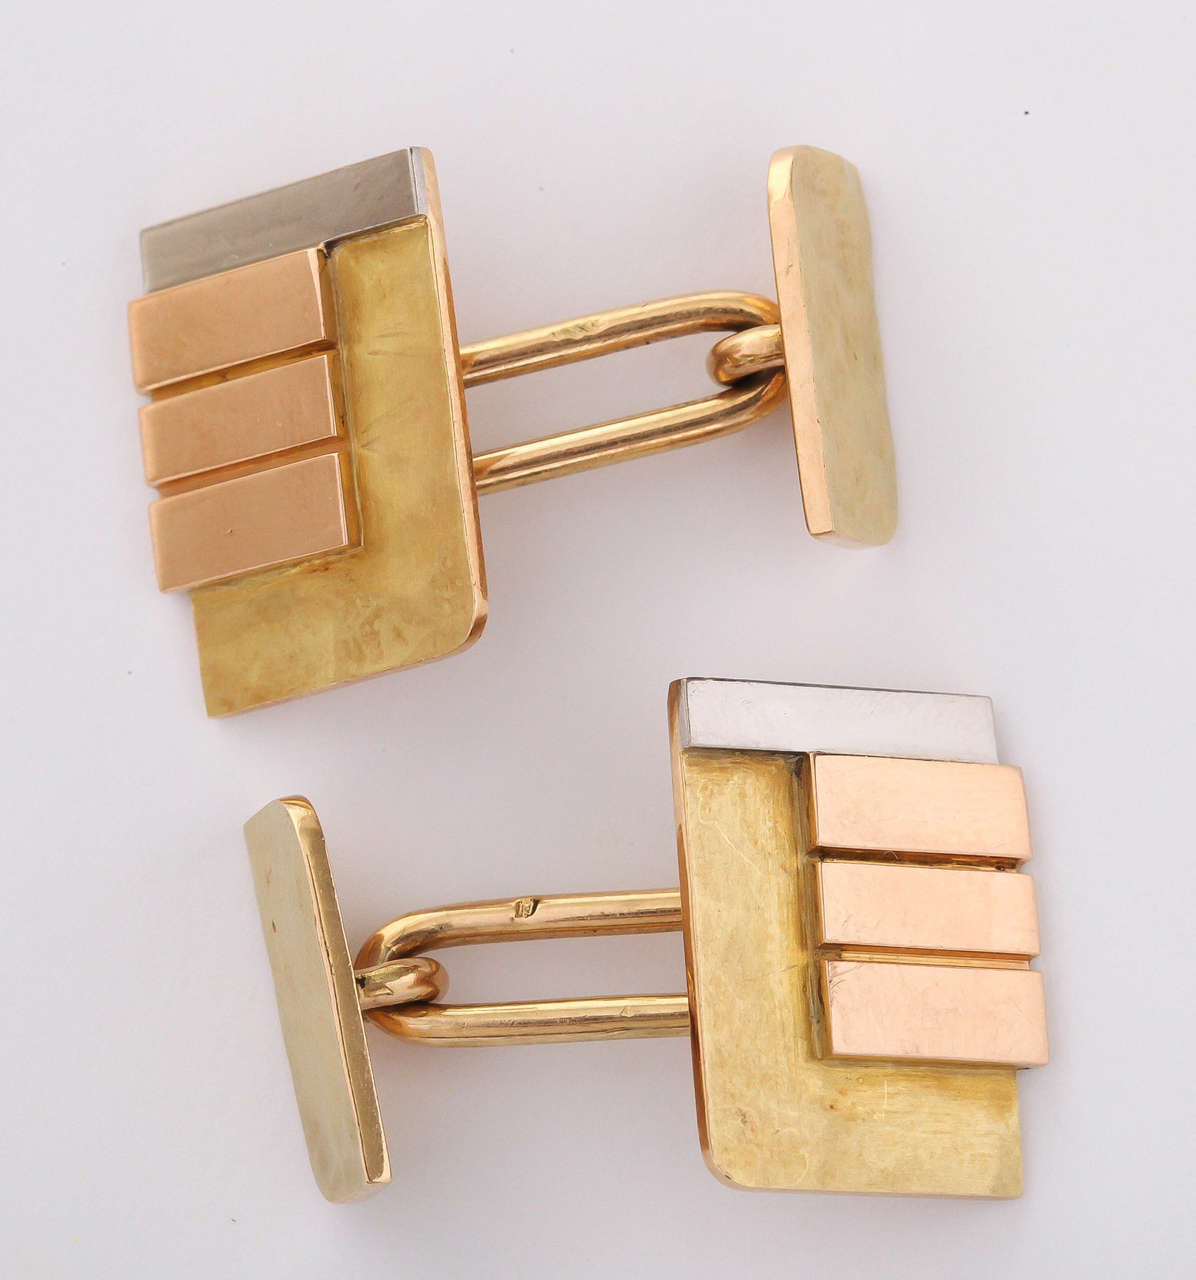 The martele base in yellow gold has applied to a triple bar in rose gold and a rectangular rod in white gold attached by an oval ring to the small side with martele surface and square corners alternating with round corners.

Hallmarked for 18 kt